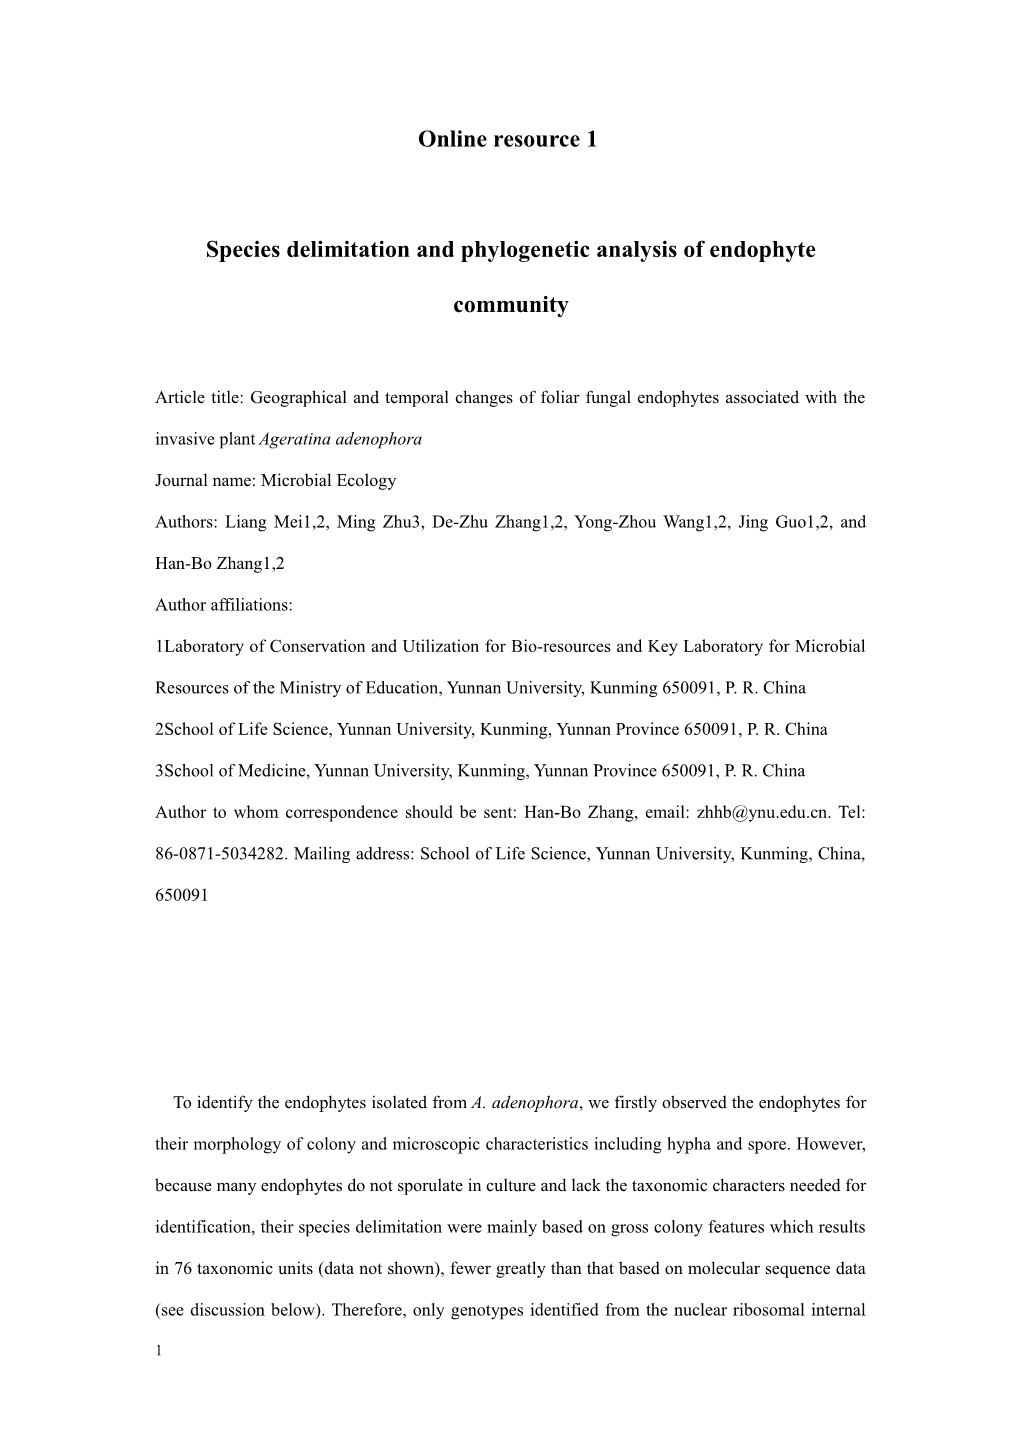 Species Delimitation and Phylogenetic Analysis of Endophyte Community